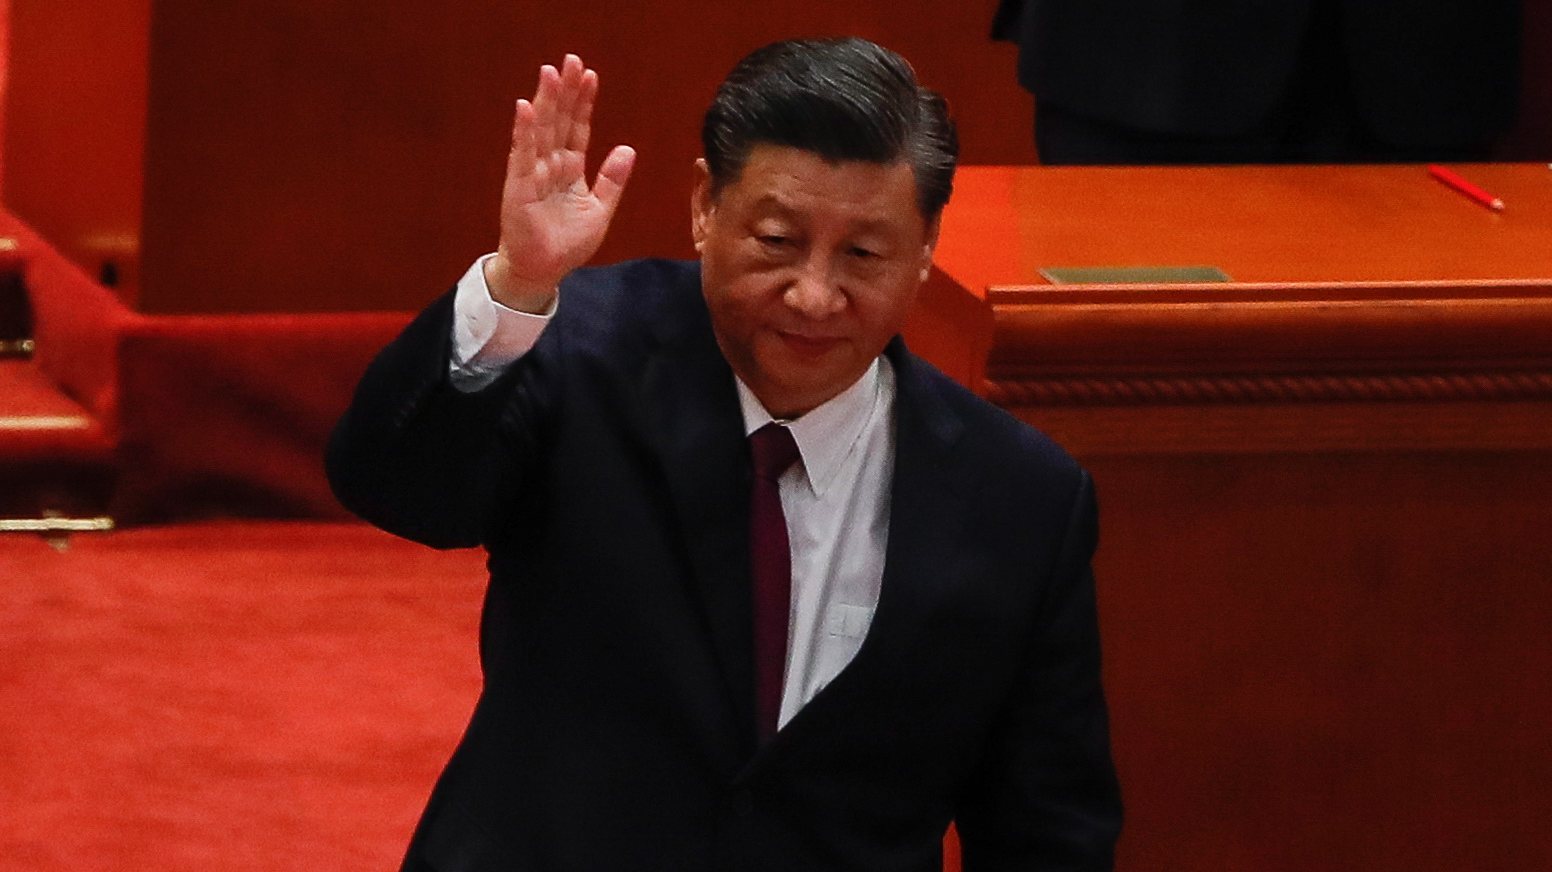 epa09877629 Chinese President Xi Jinping gestures to the crowd after the commending meeting for Beijing 2022 Winter Olympic and Paralympic games at the Great Hall of the People in Beijing, China, 08 April 2022. The 2022 Winter Olympics were held in Beijing from 04 to 20 February, while the 2022 Winter Paralympics were held from 04 to 13 March 2022.  EPA/MARK R. CRISTINO